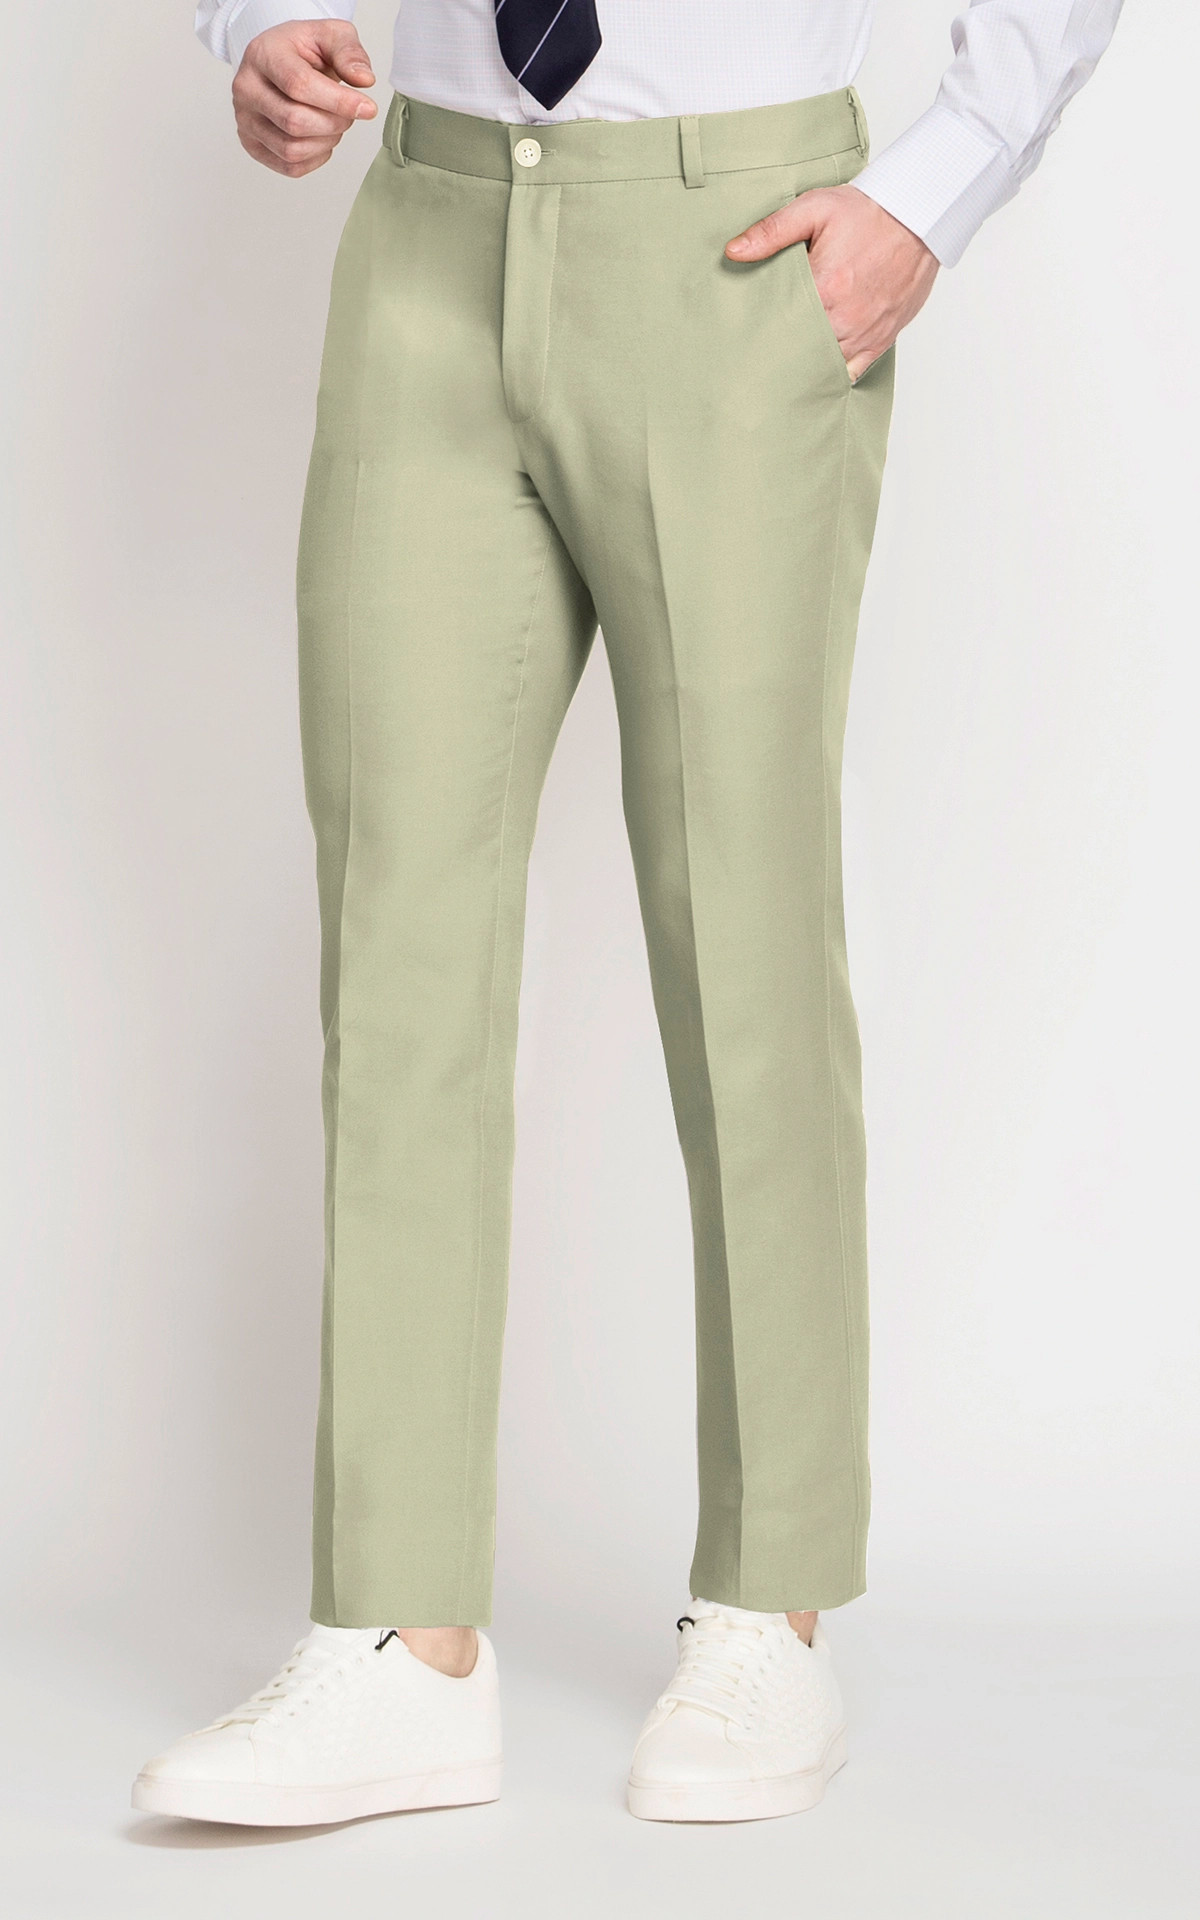 Formal Cotton Trousers - Colorhunt Clothing